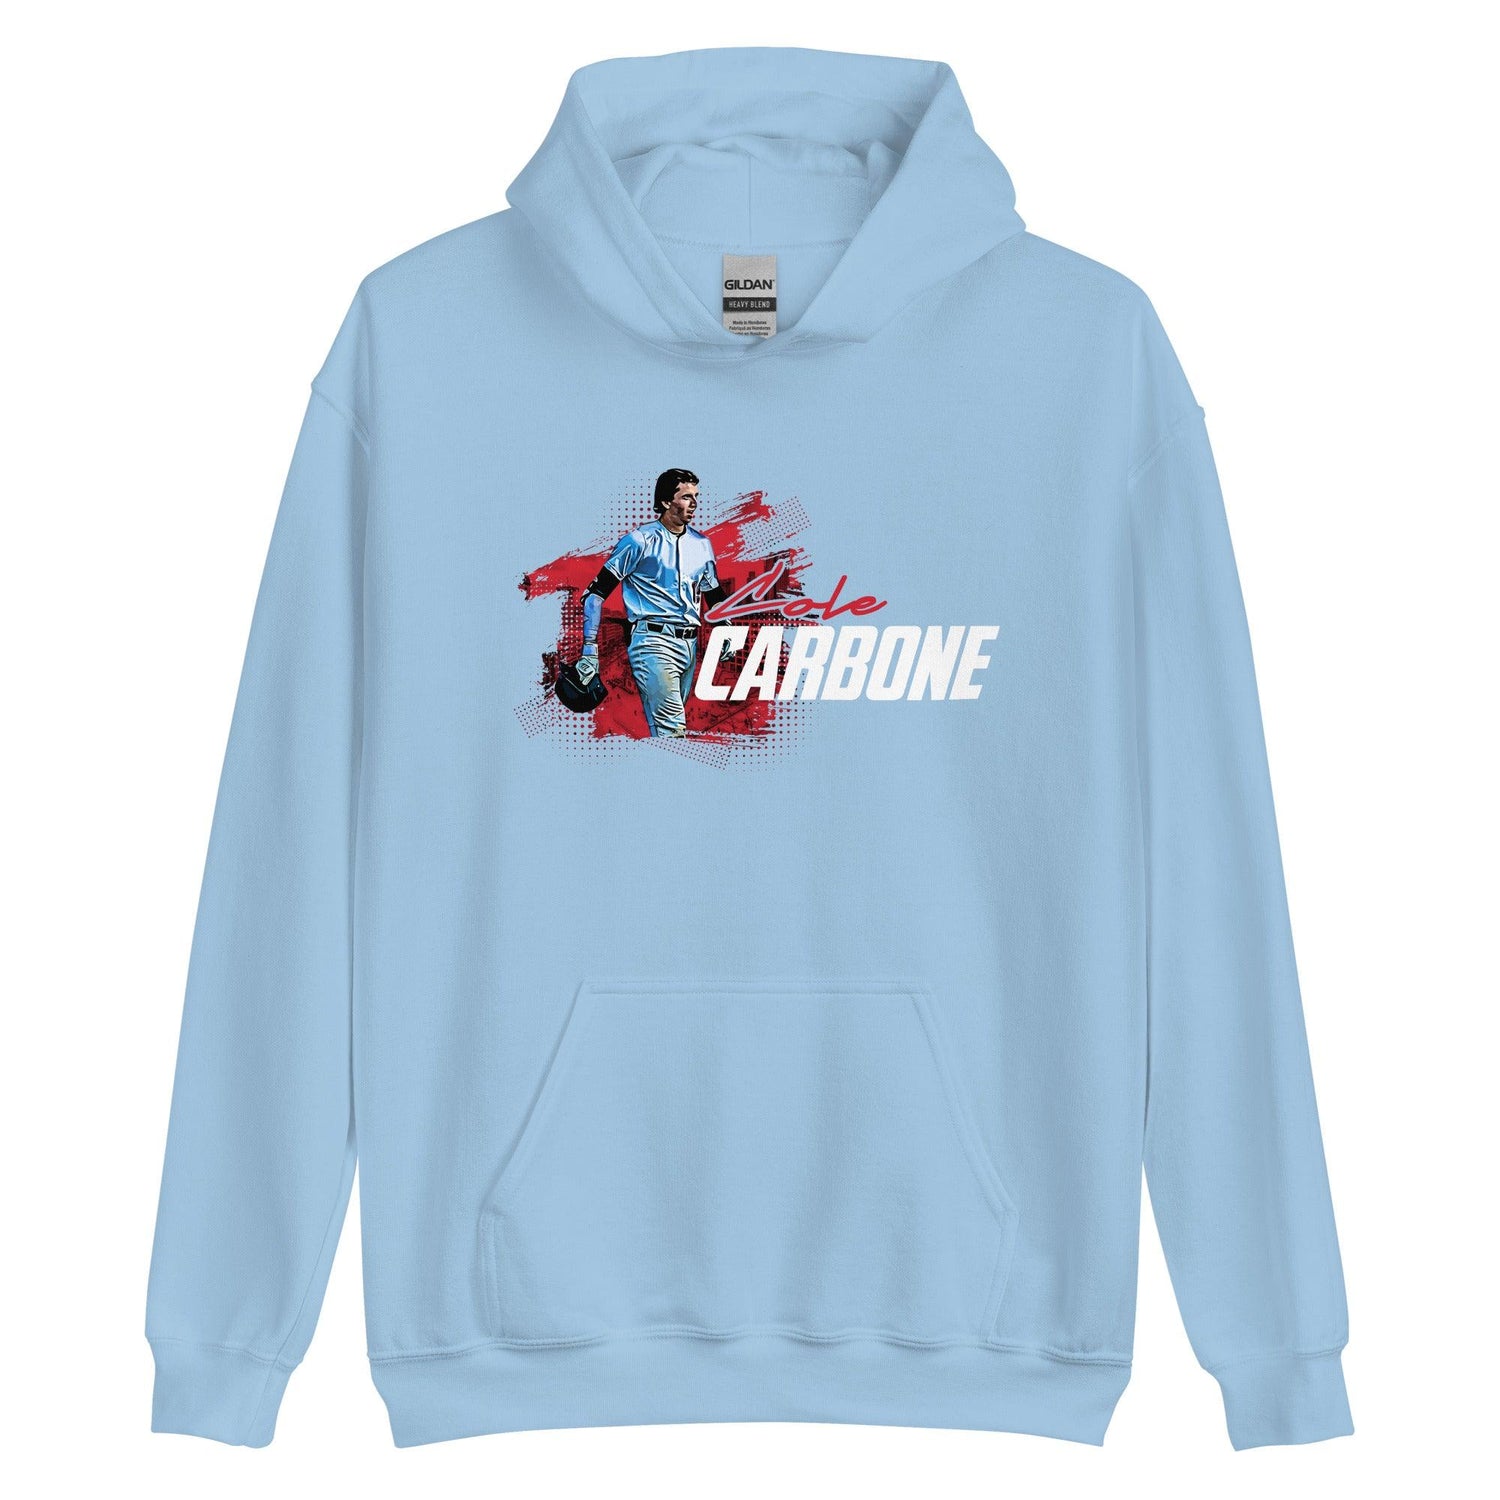 Cole Carbone "Gameday" Hoodie - Fan Arch